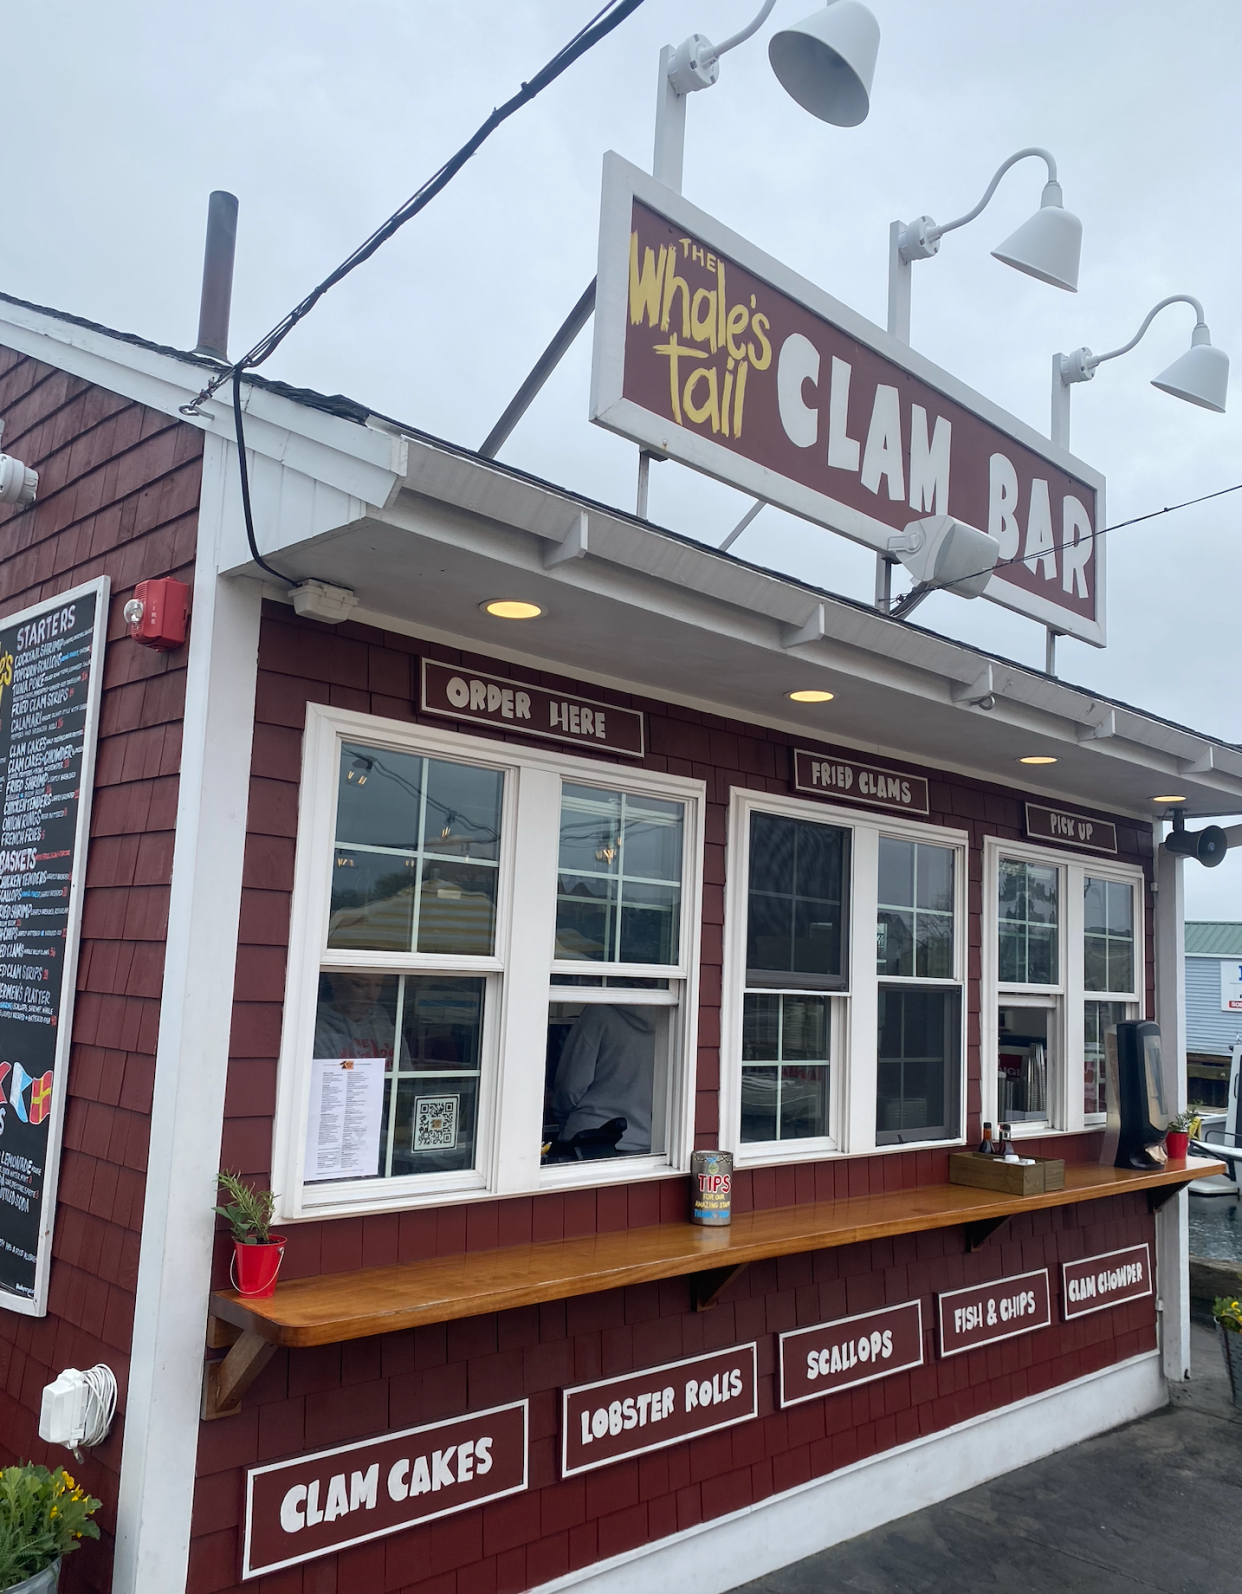 The Whale Tail Clam Bar reopens on Pier 3 on May 3.